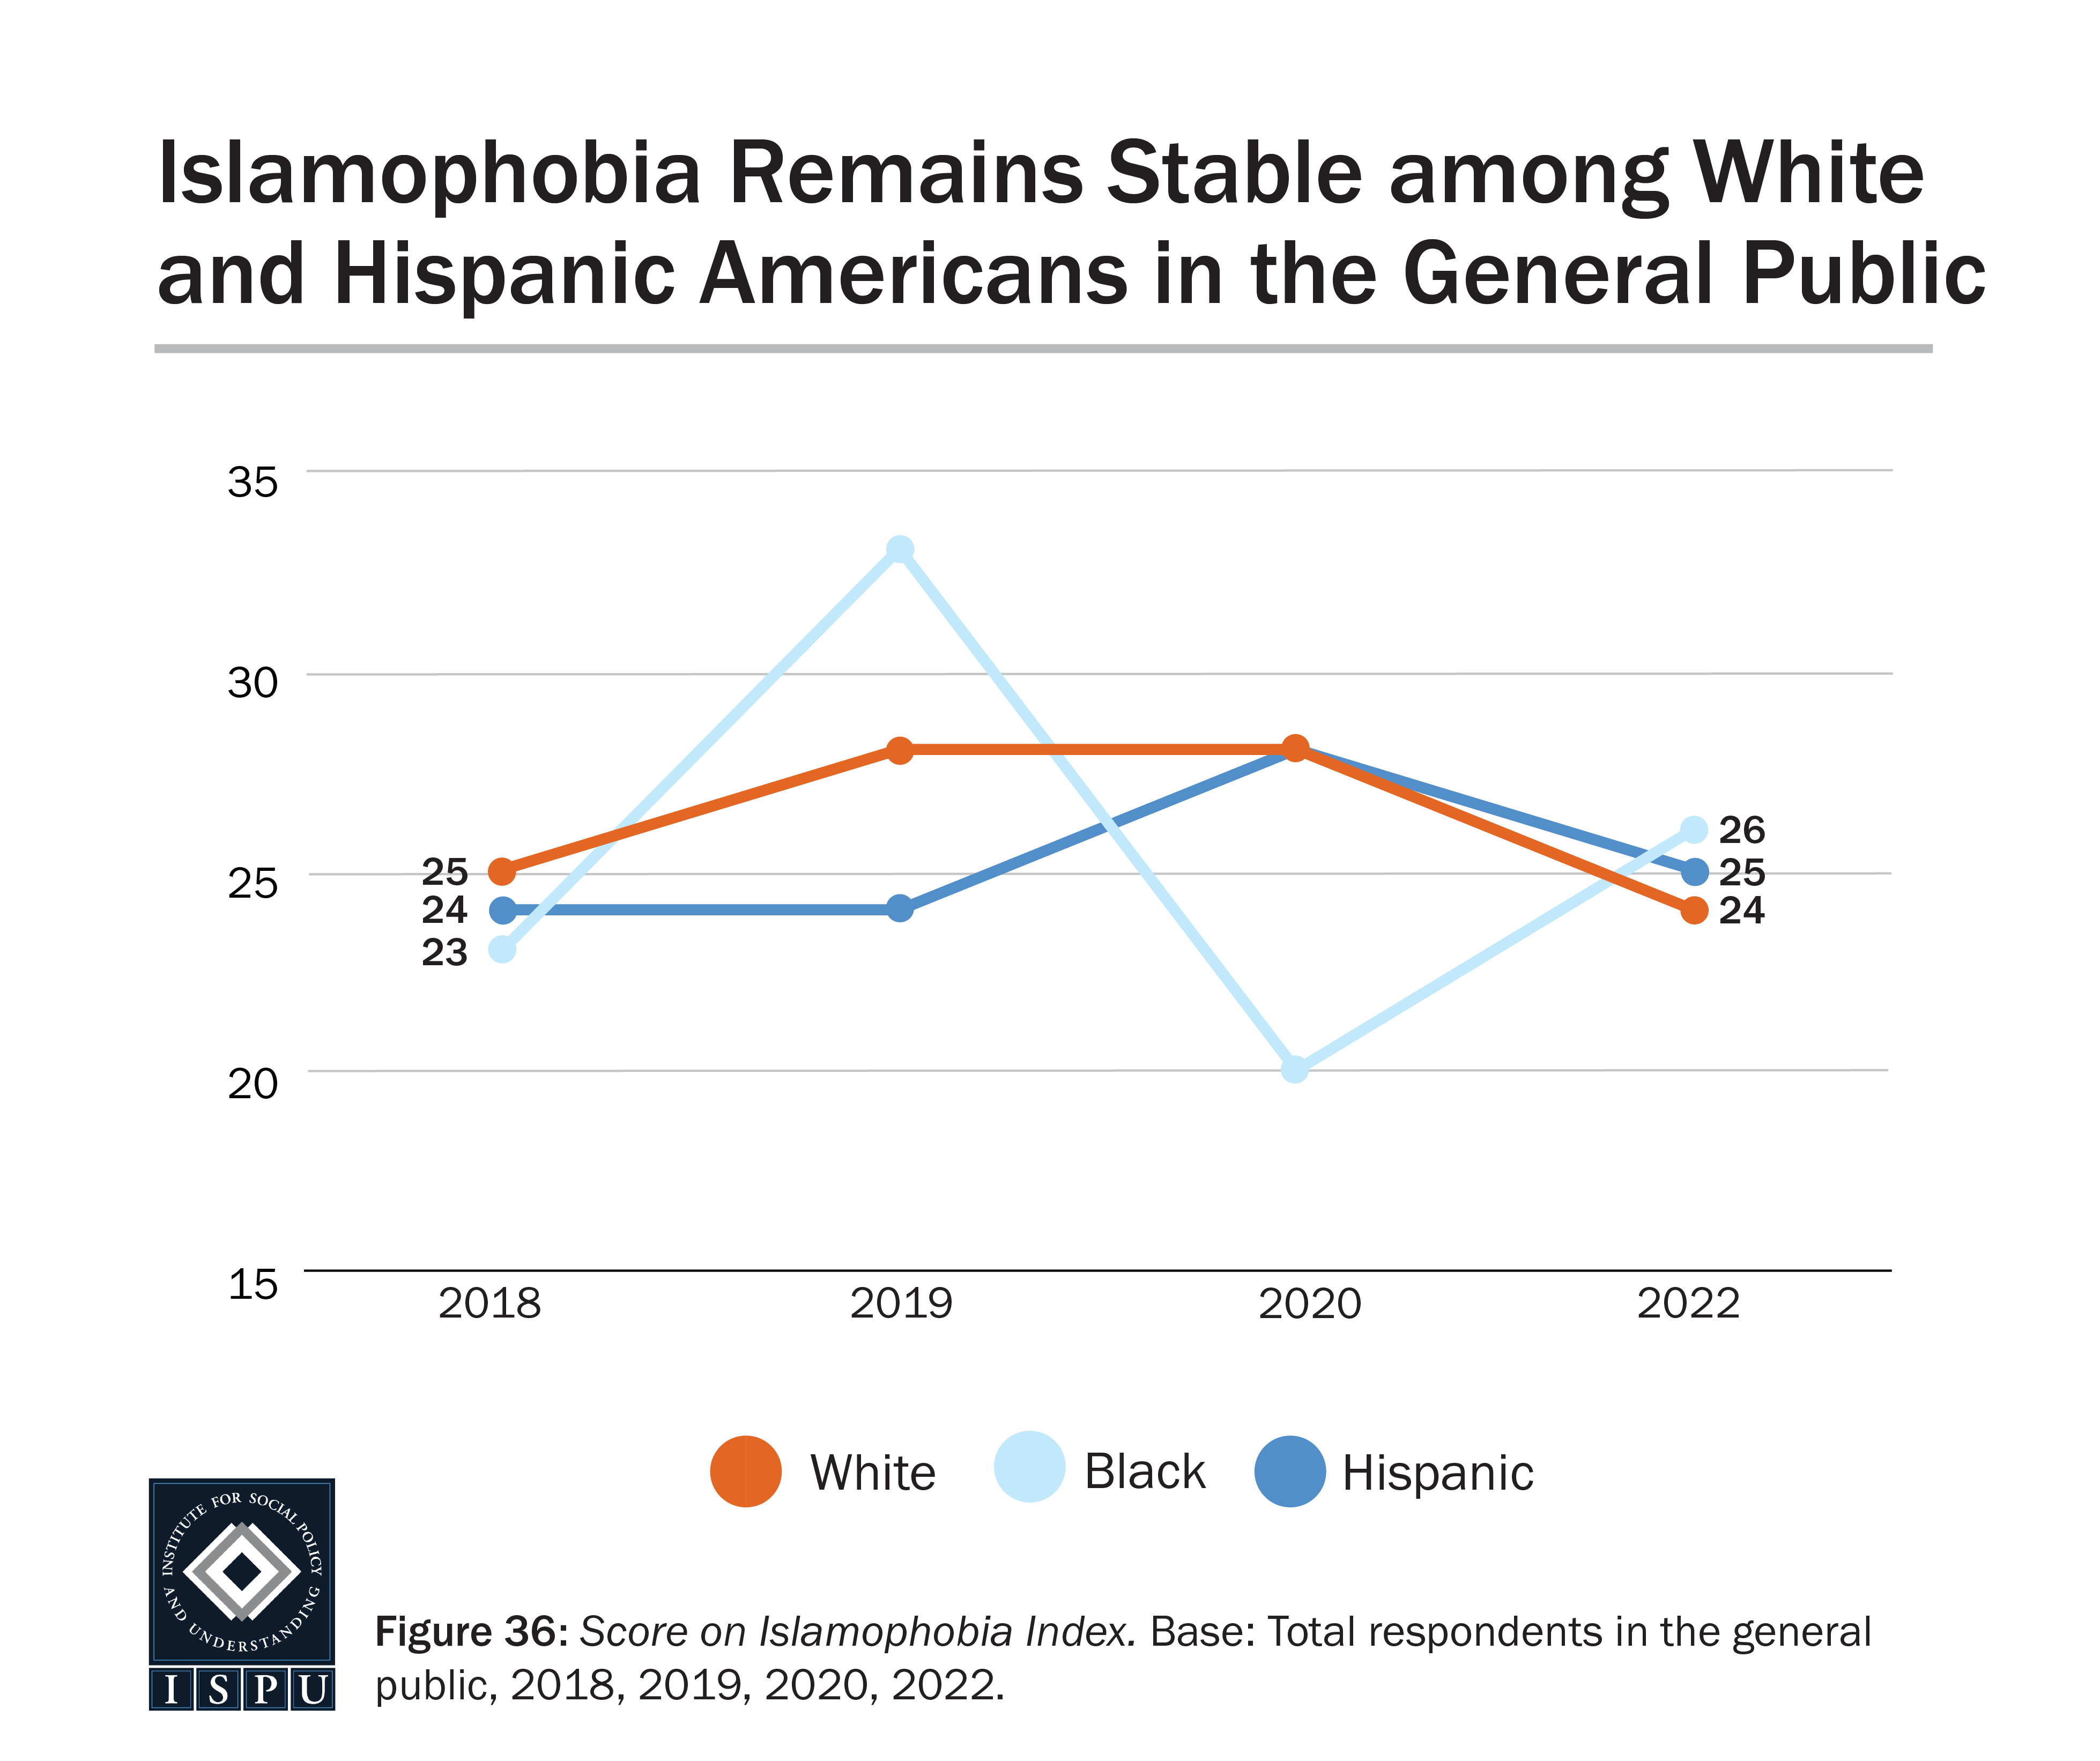 A line graph showing scores on the Islamophobia Index among racial groups in the general public between 2018 - 2022.